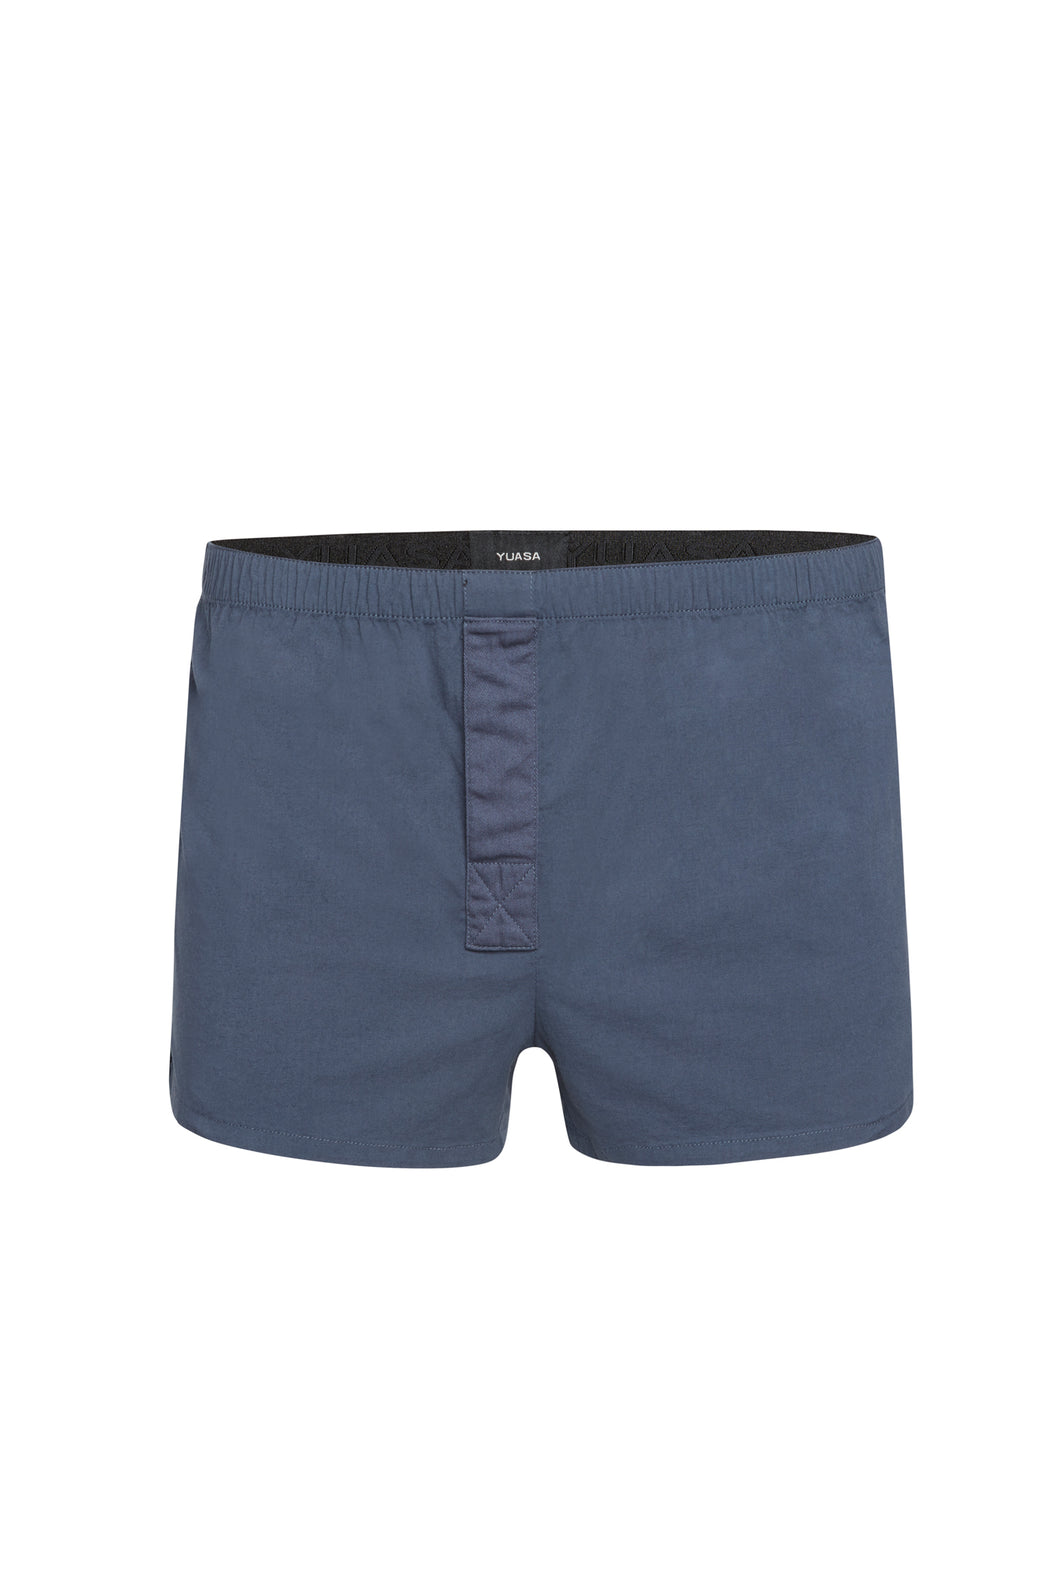 THE BOXER - NAVY